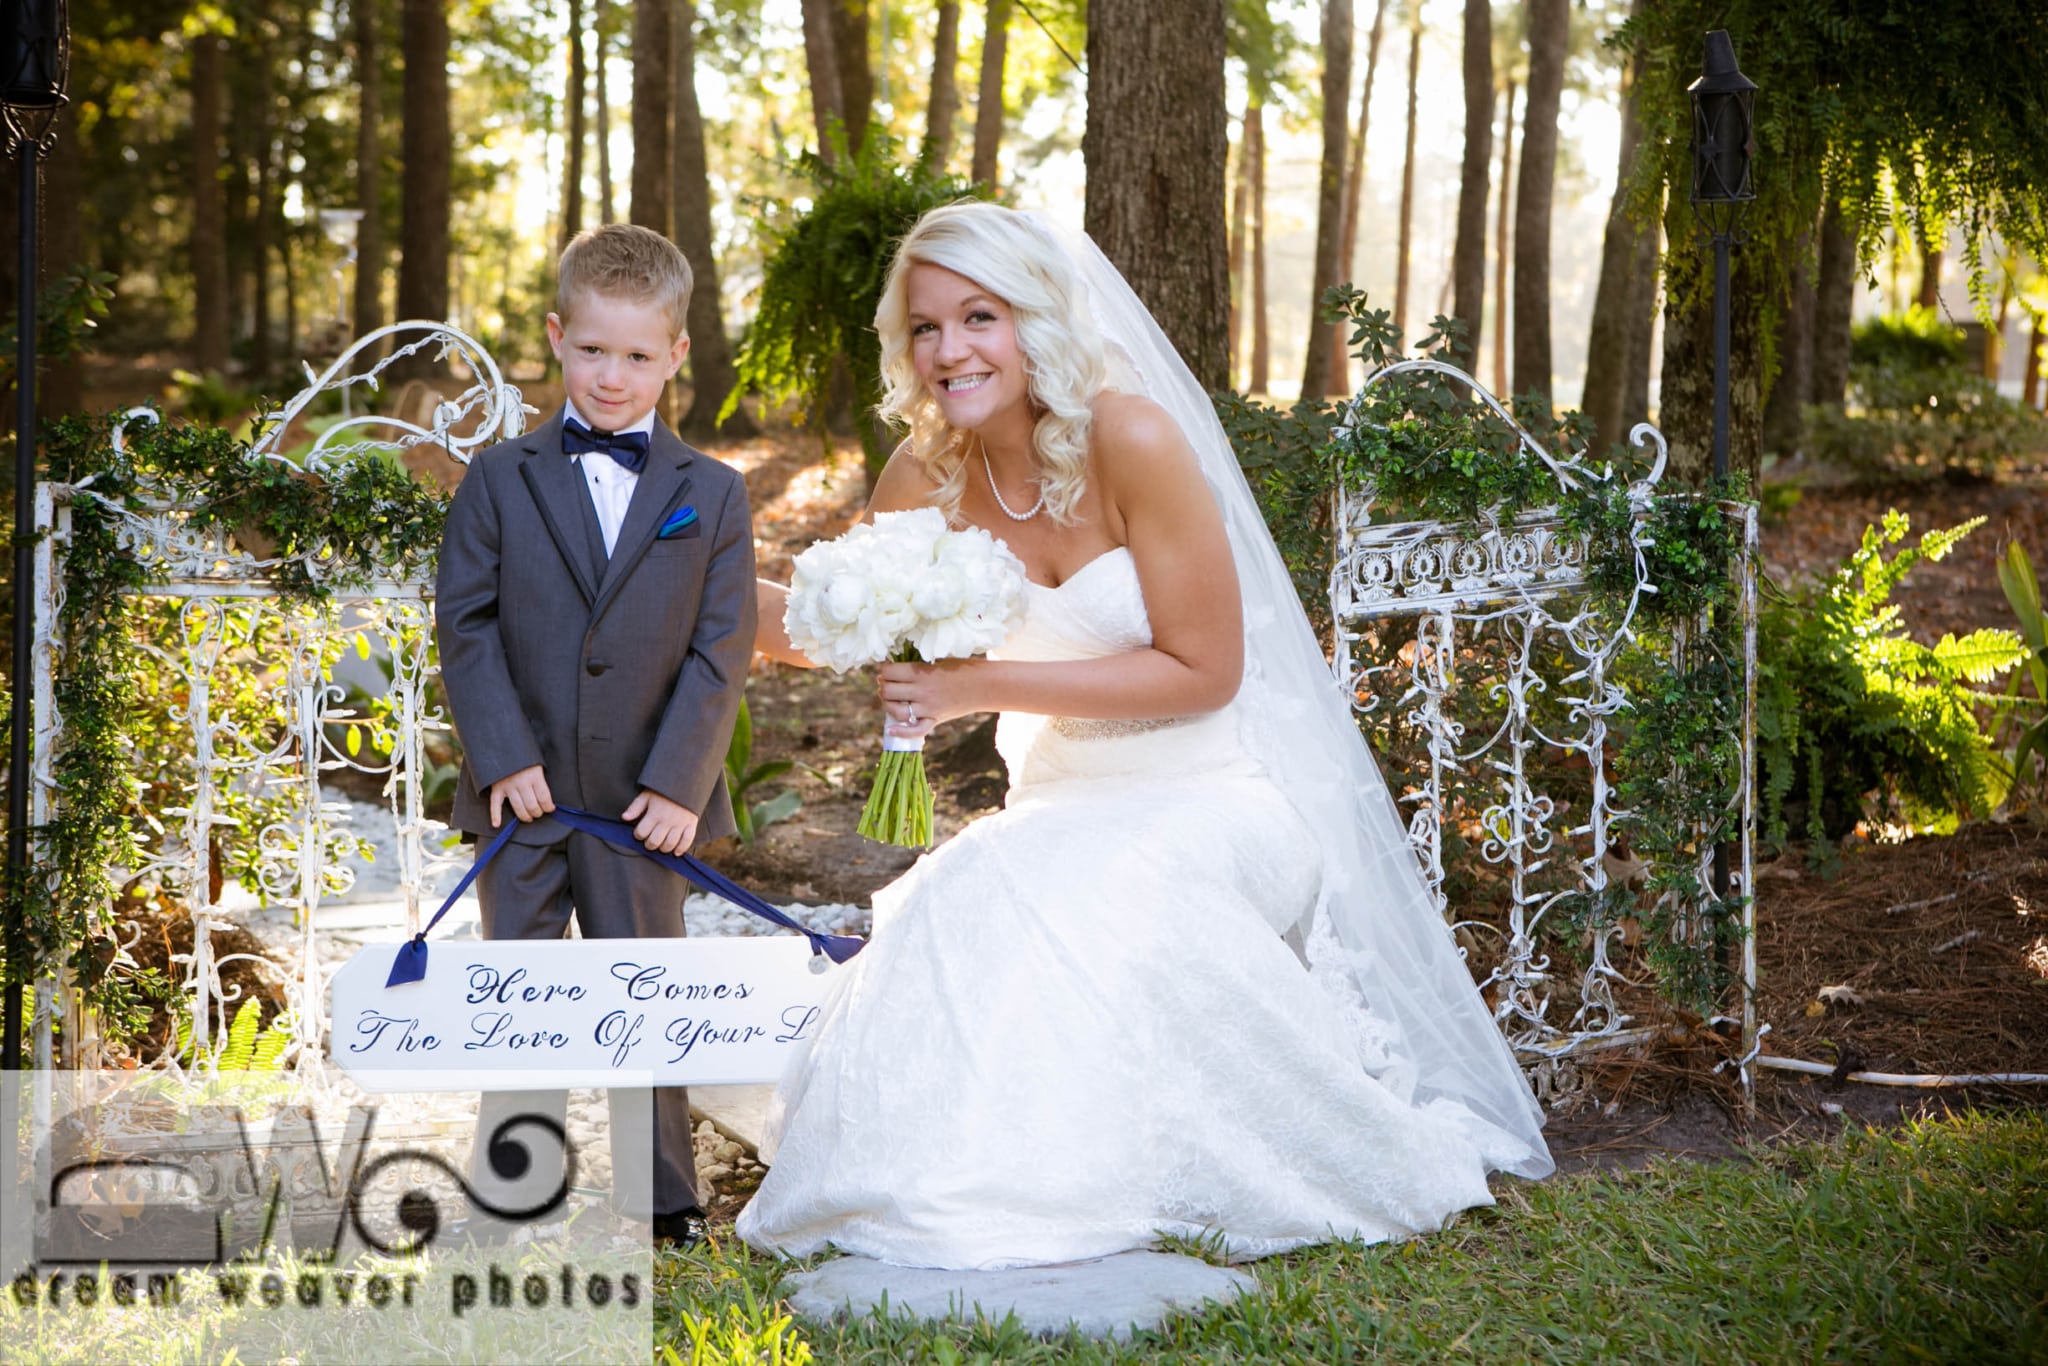 Does the Ring Bearer Have to Carry the Rings Down the Aisle?